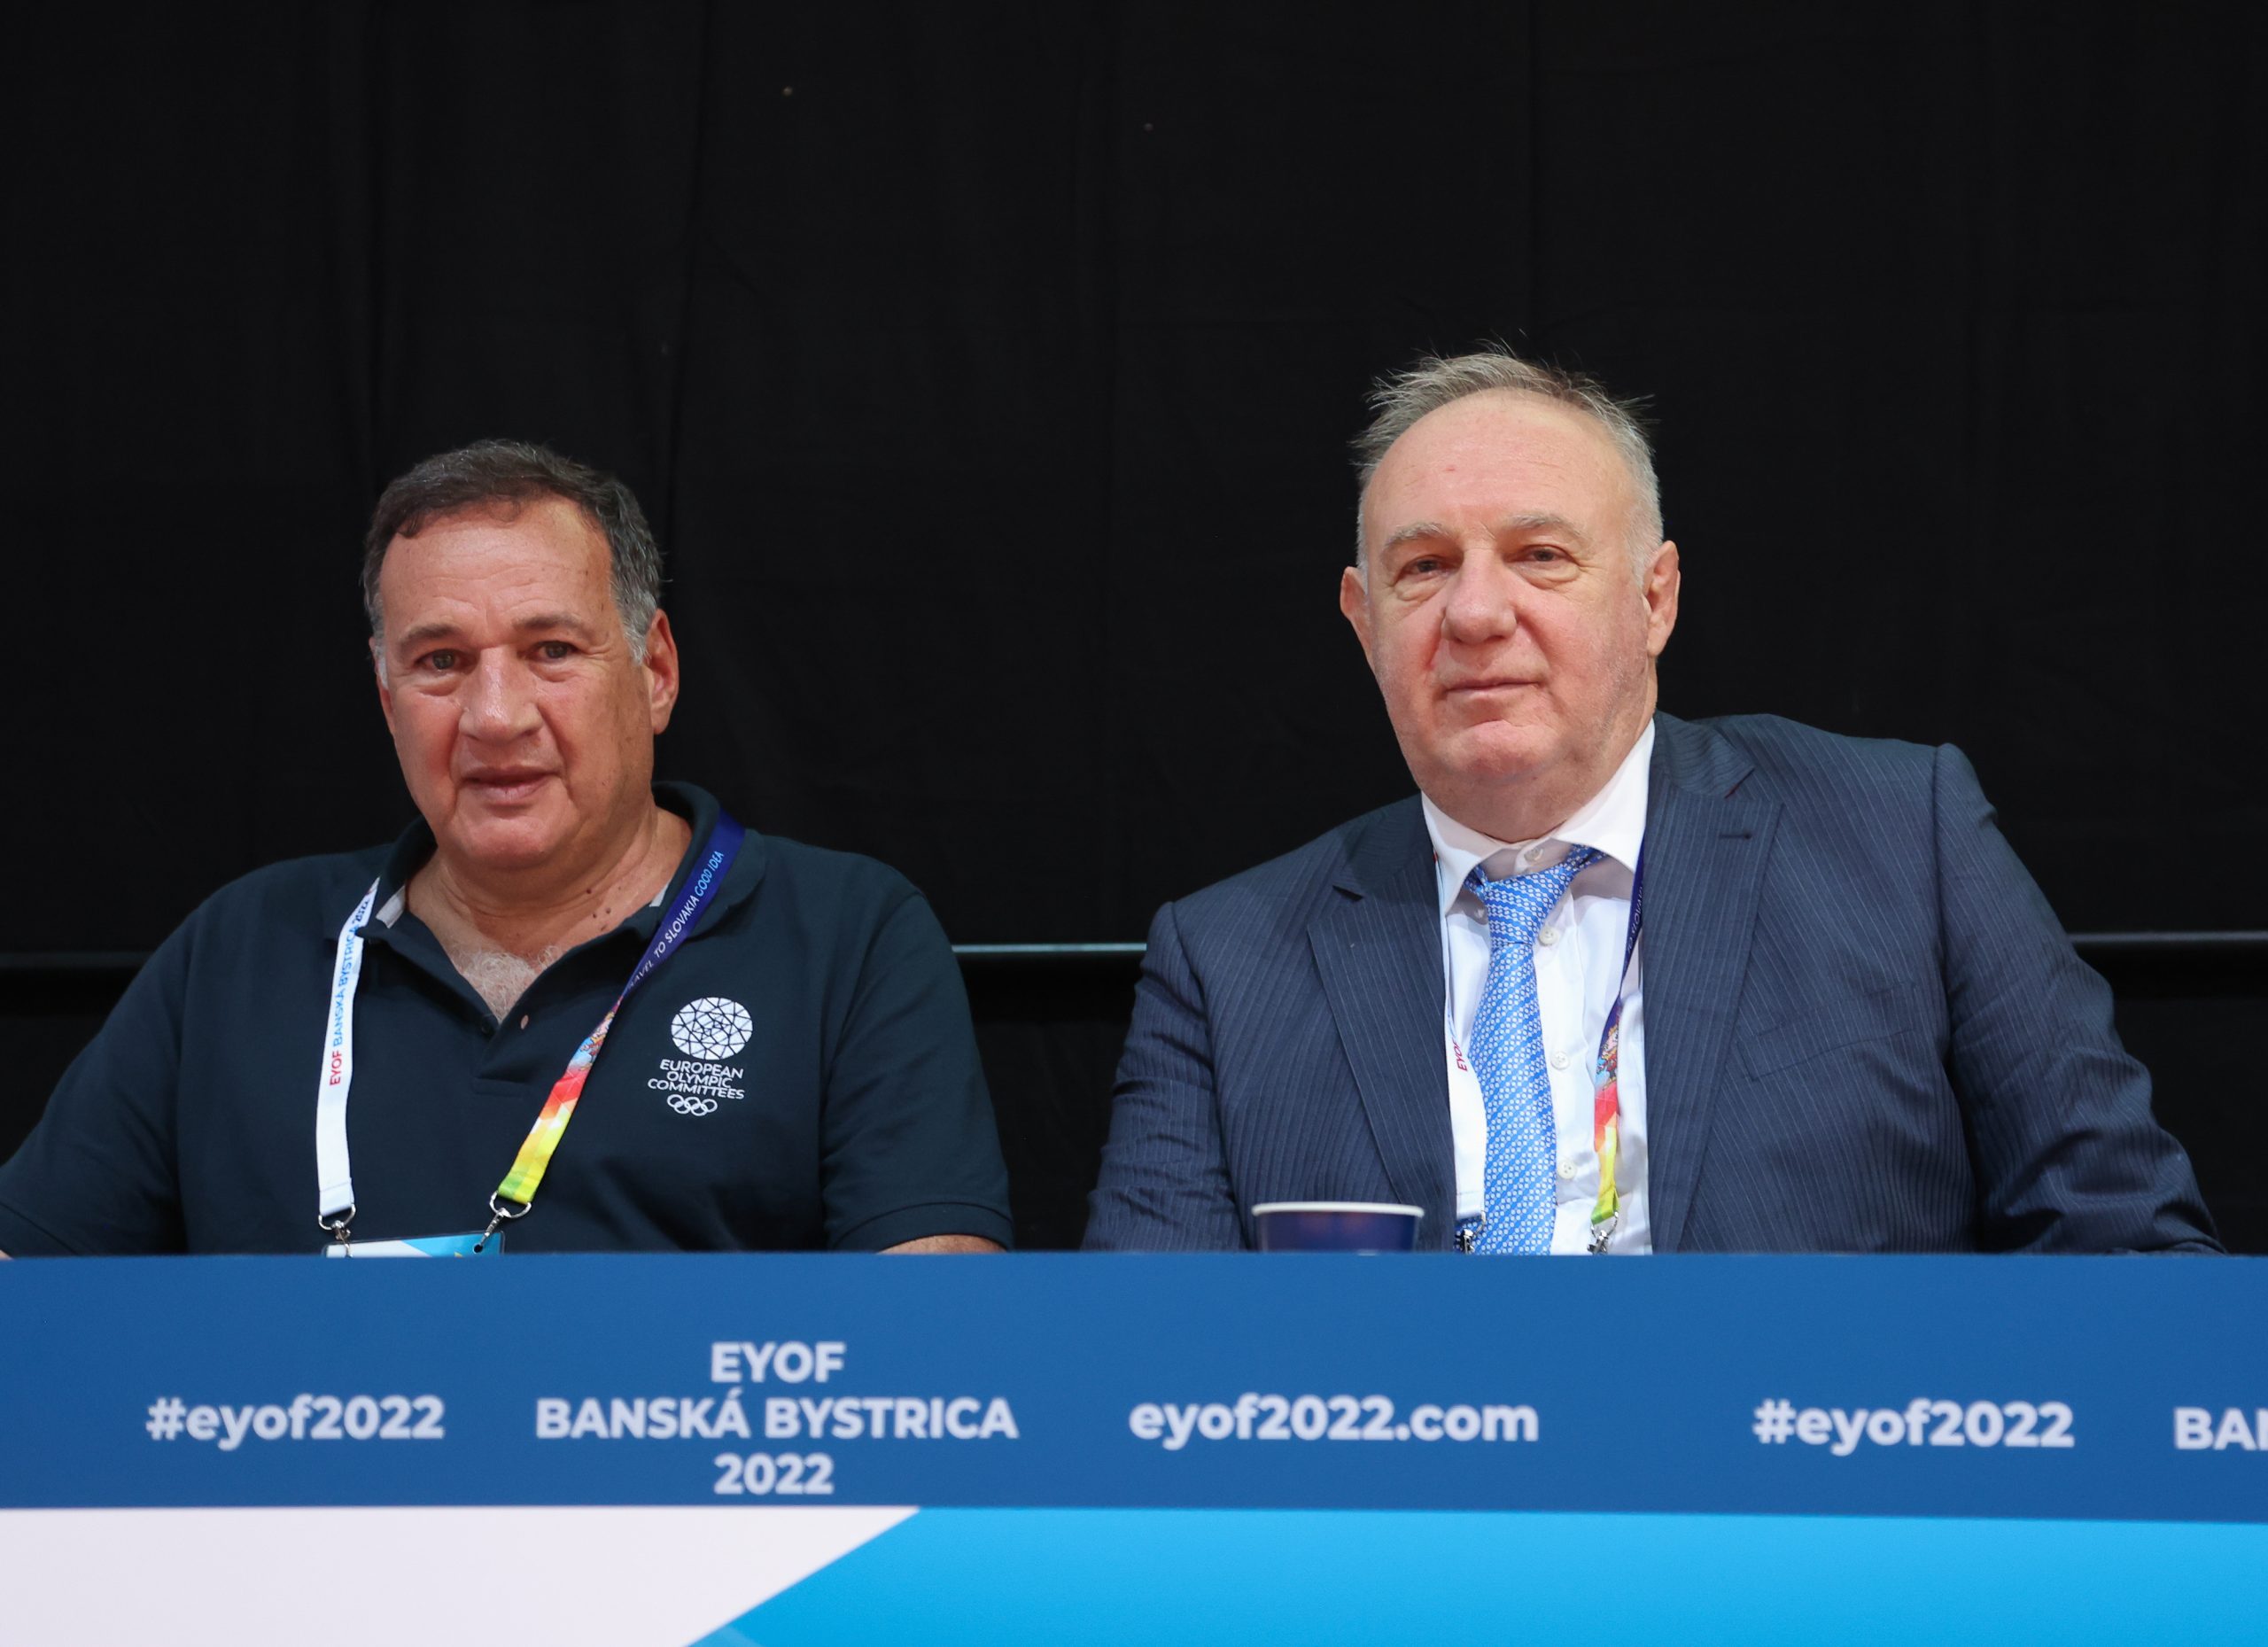 EJU PRESIDENT DR TÓTH WELCOMES EOC PRESIDENT TO THE JUDO EVENT AT EYOF